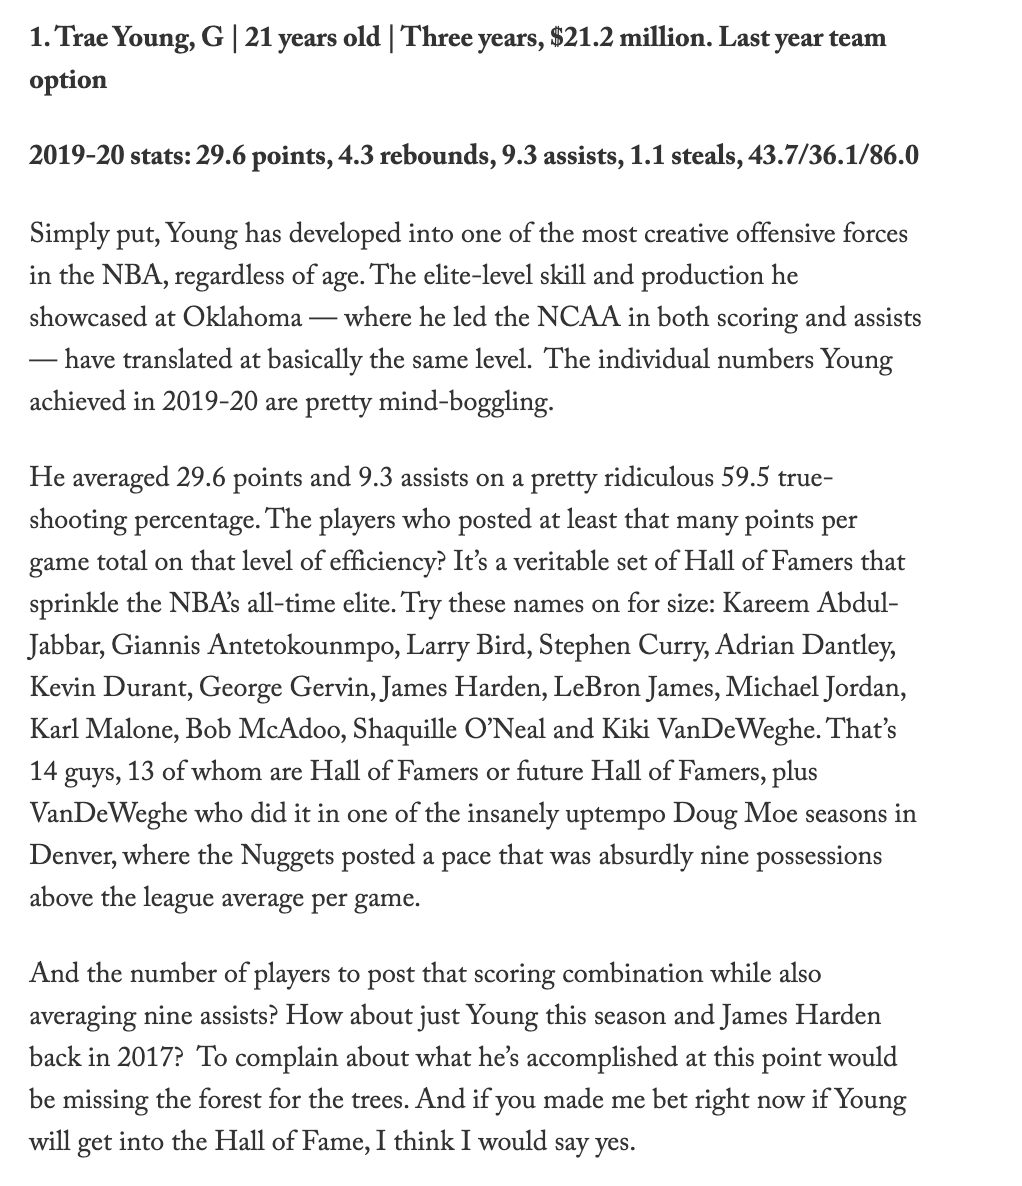 I finished off the 2019-20 Rookie Scale Rankings, including deep dives and breakdowns on all of the young players for…Sacramento Kings:  https://theathletic.com/1821842 Dallas Mavericks:  https://theathletic.com/1817824 Atlanta Hawks:  https://theathletic.com/1545973 (2/x)